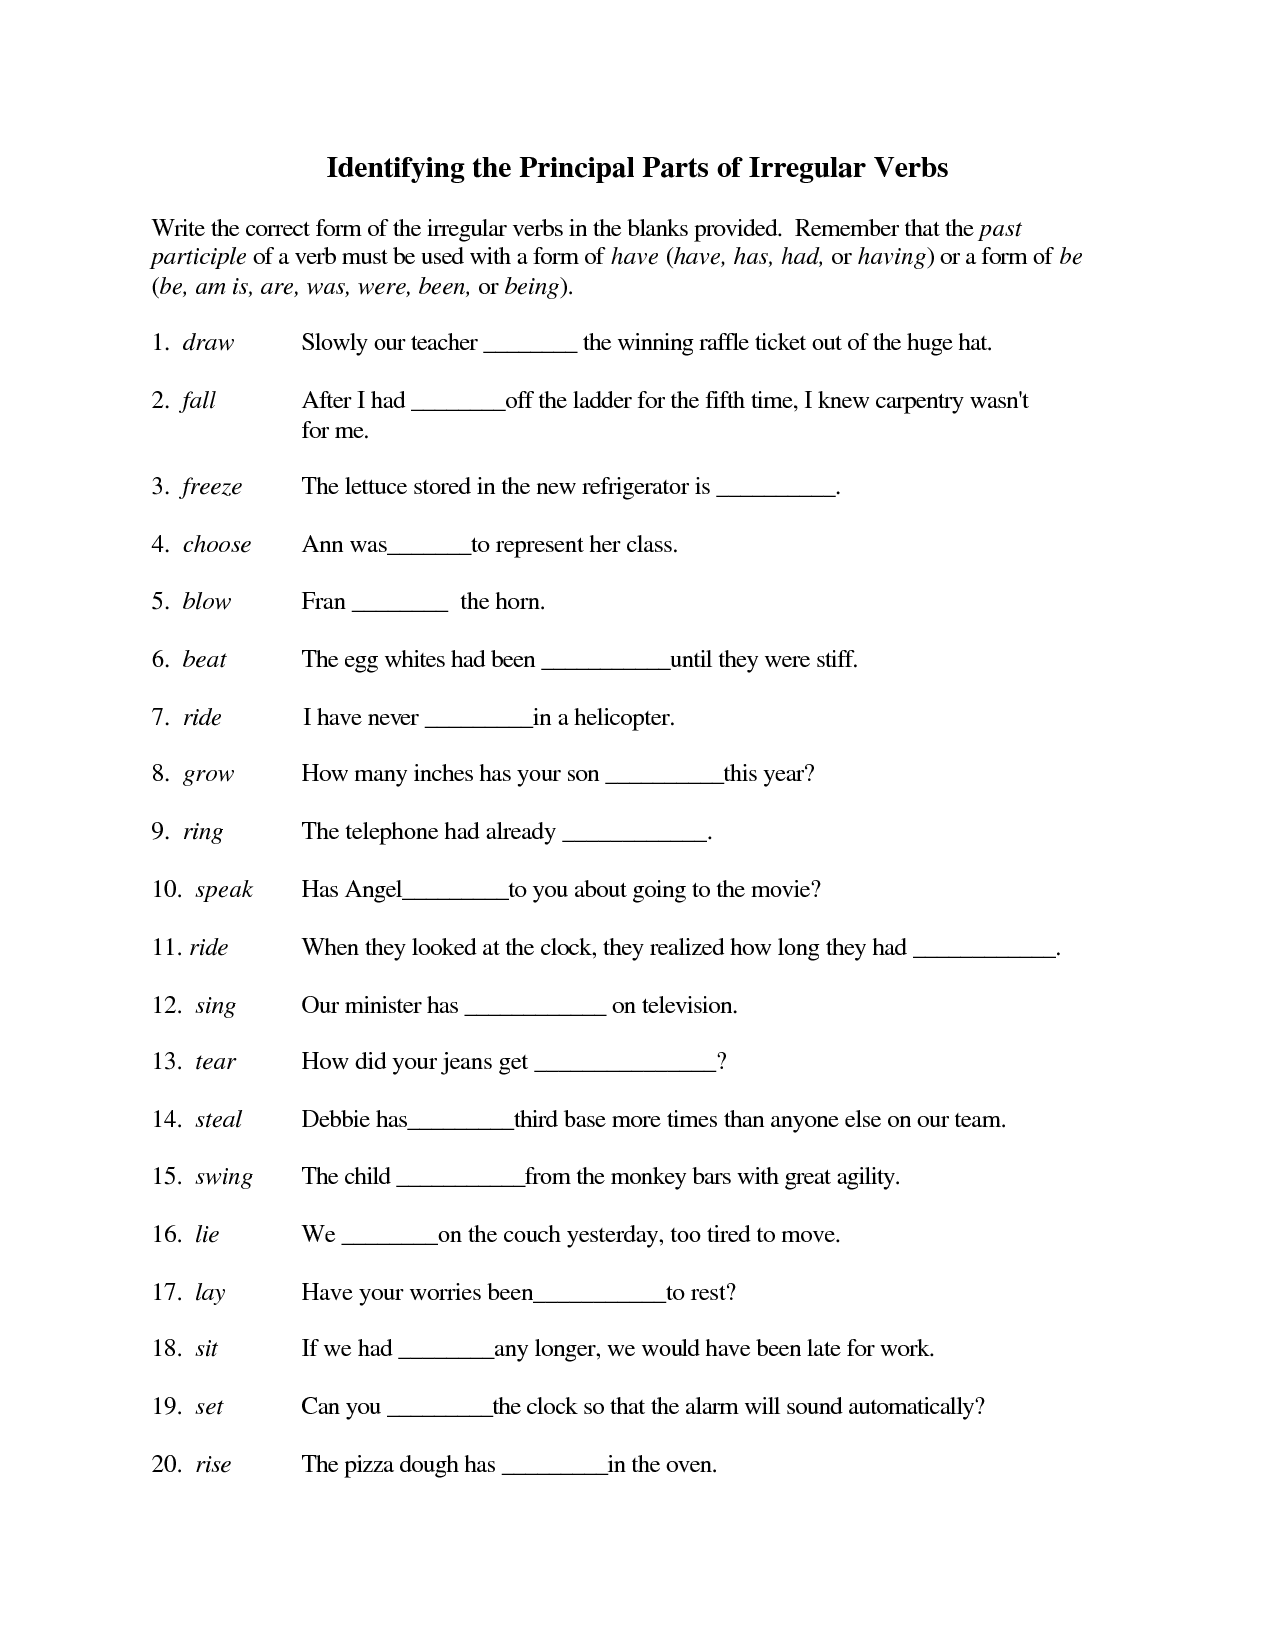 Past Participle Verbs Worksheets 5th Grade